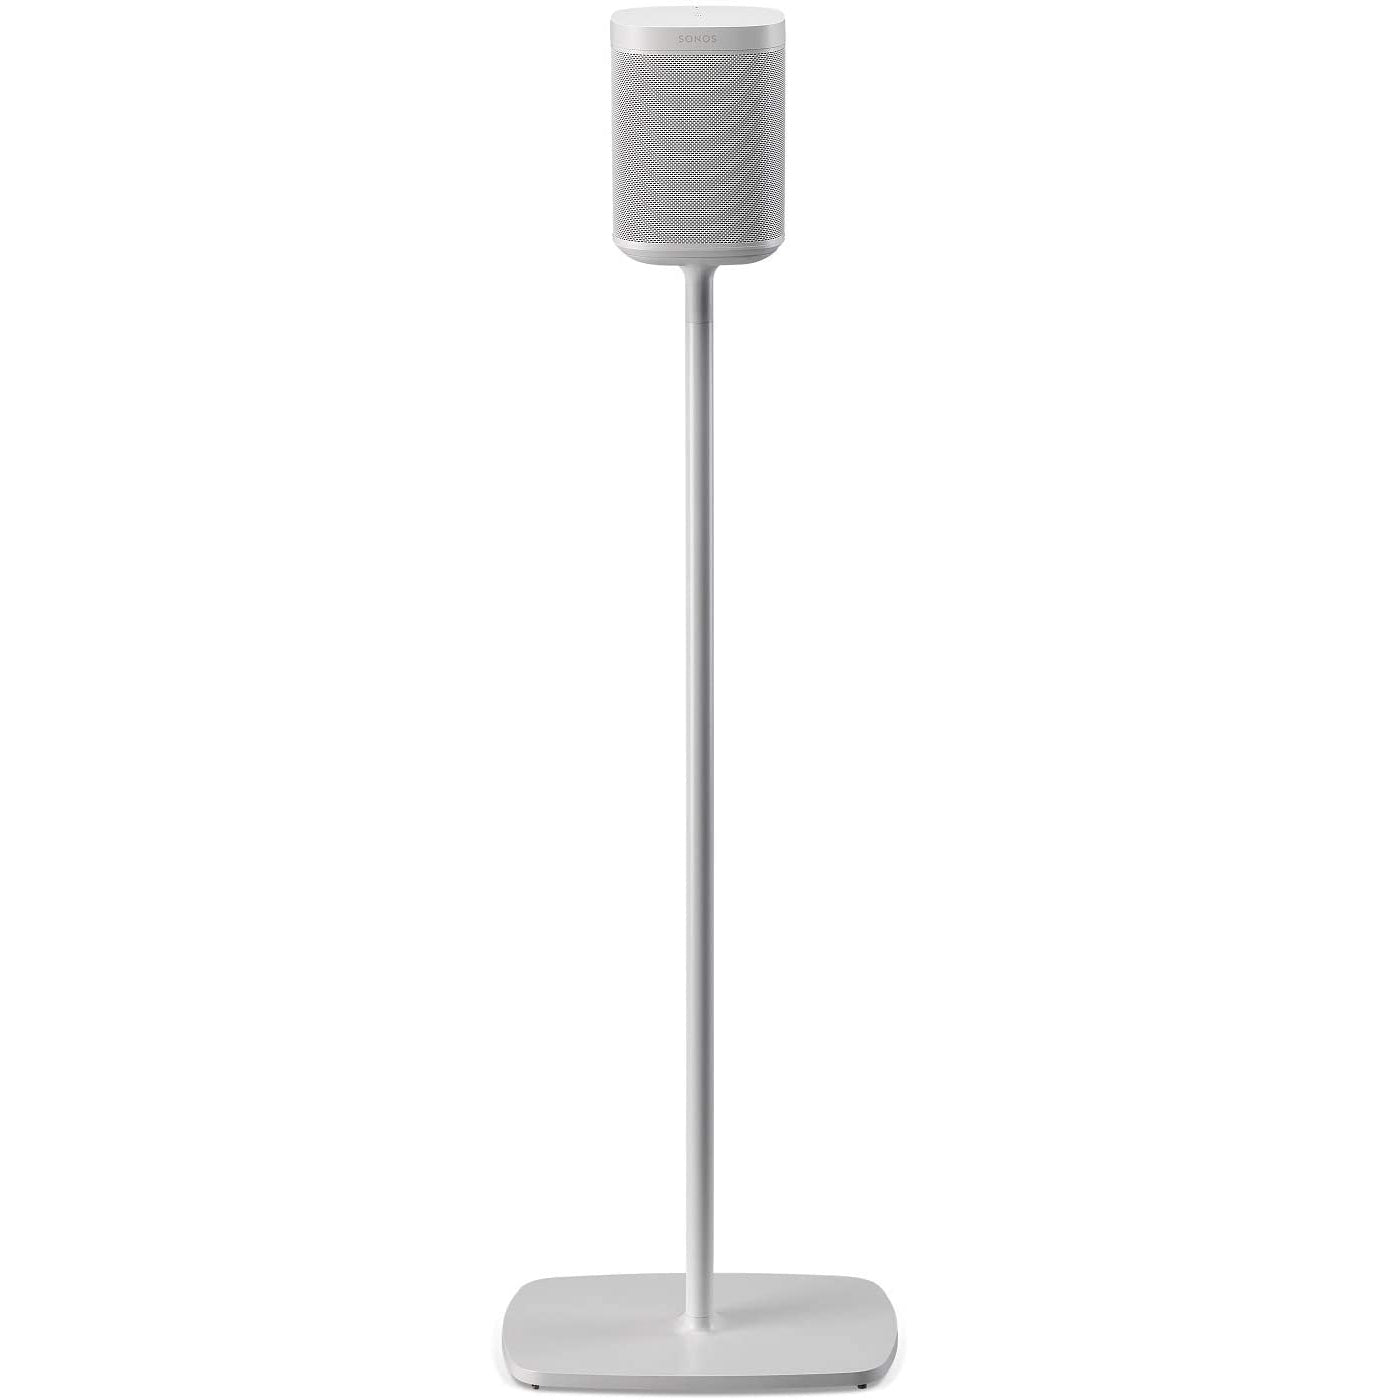 Flexson S1-FS Floor Stand for Sonos One, One SL and Play:1, Black / White